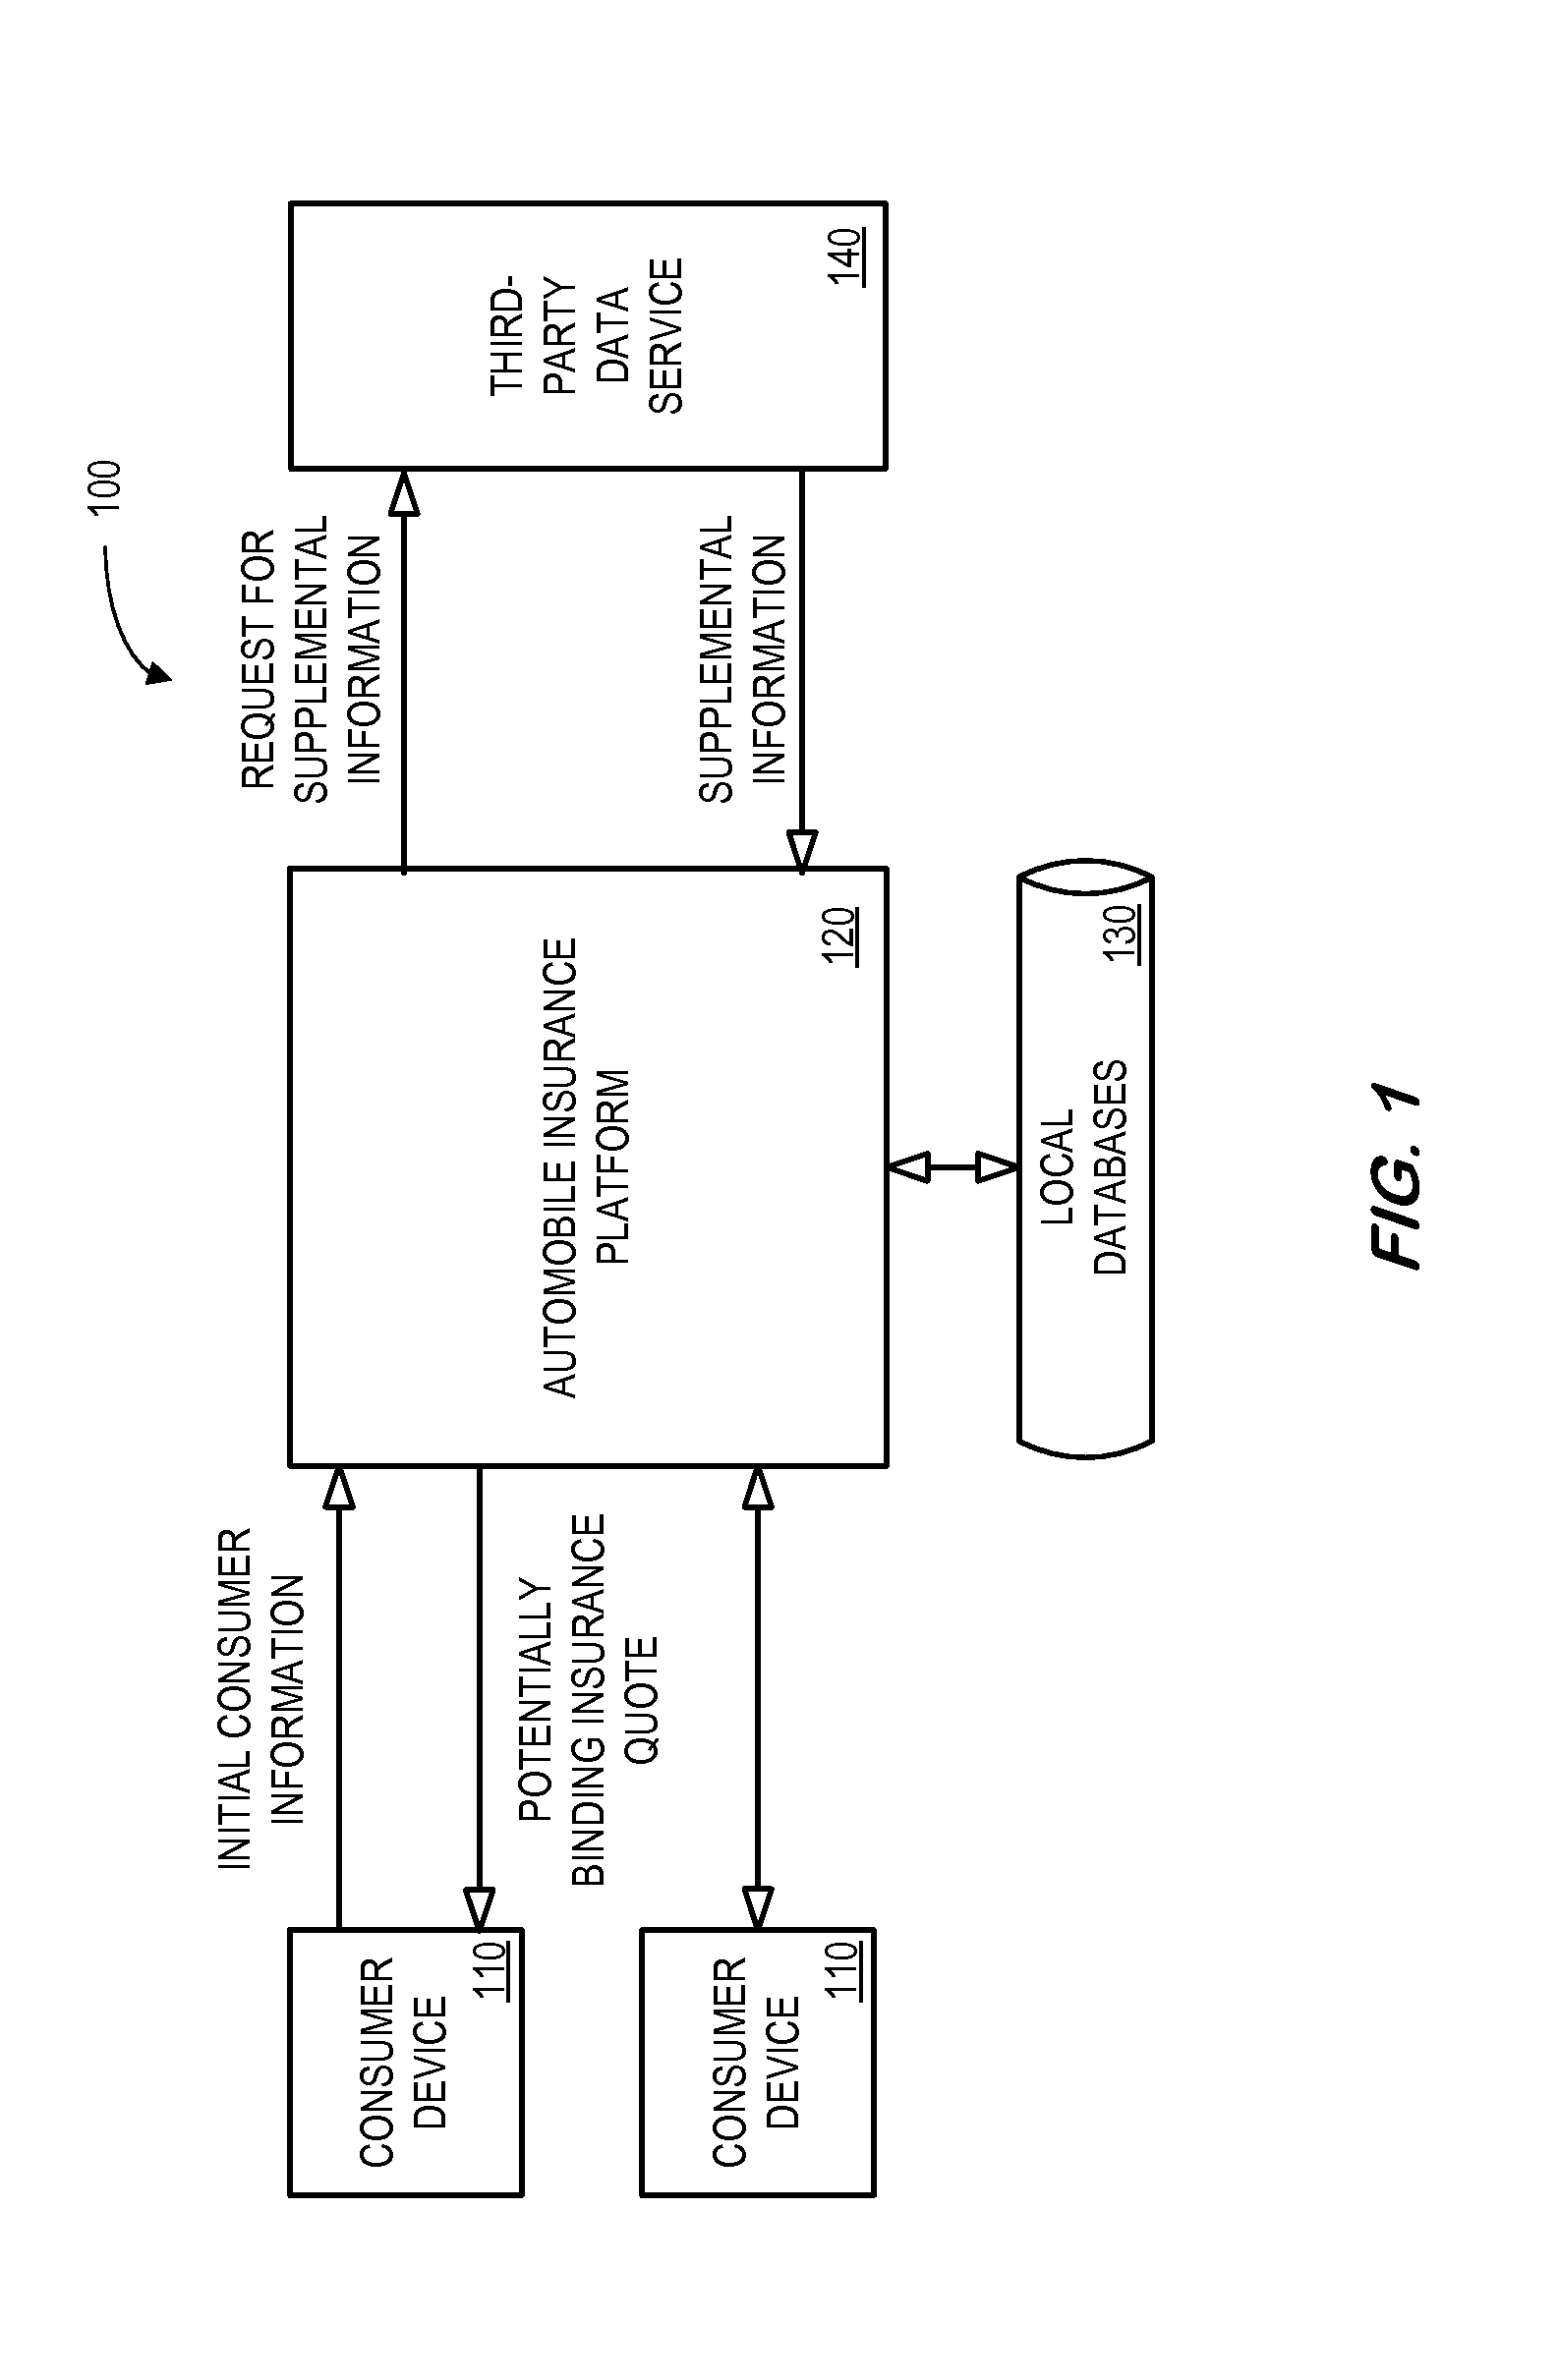 System and method for calculating an insurance premium based on initial consumer information